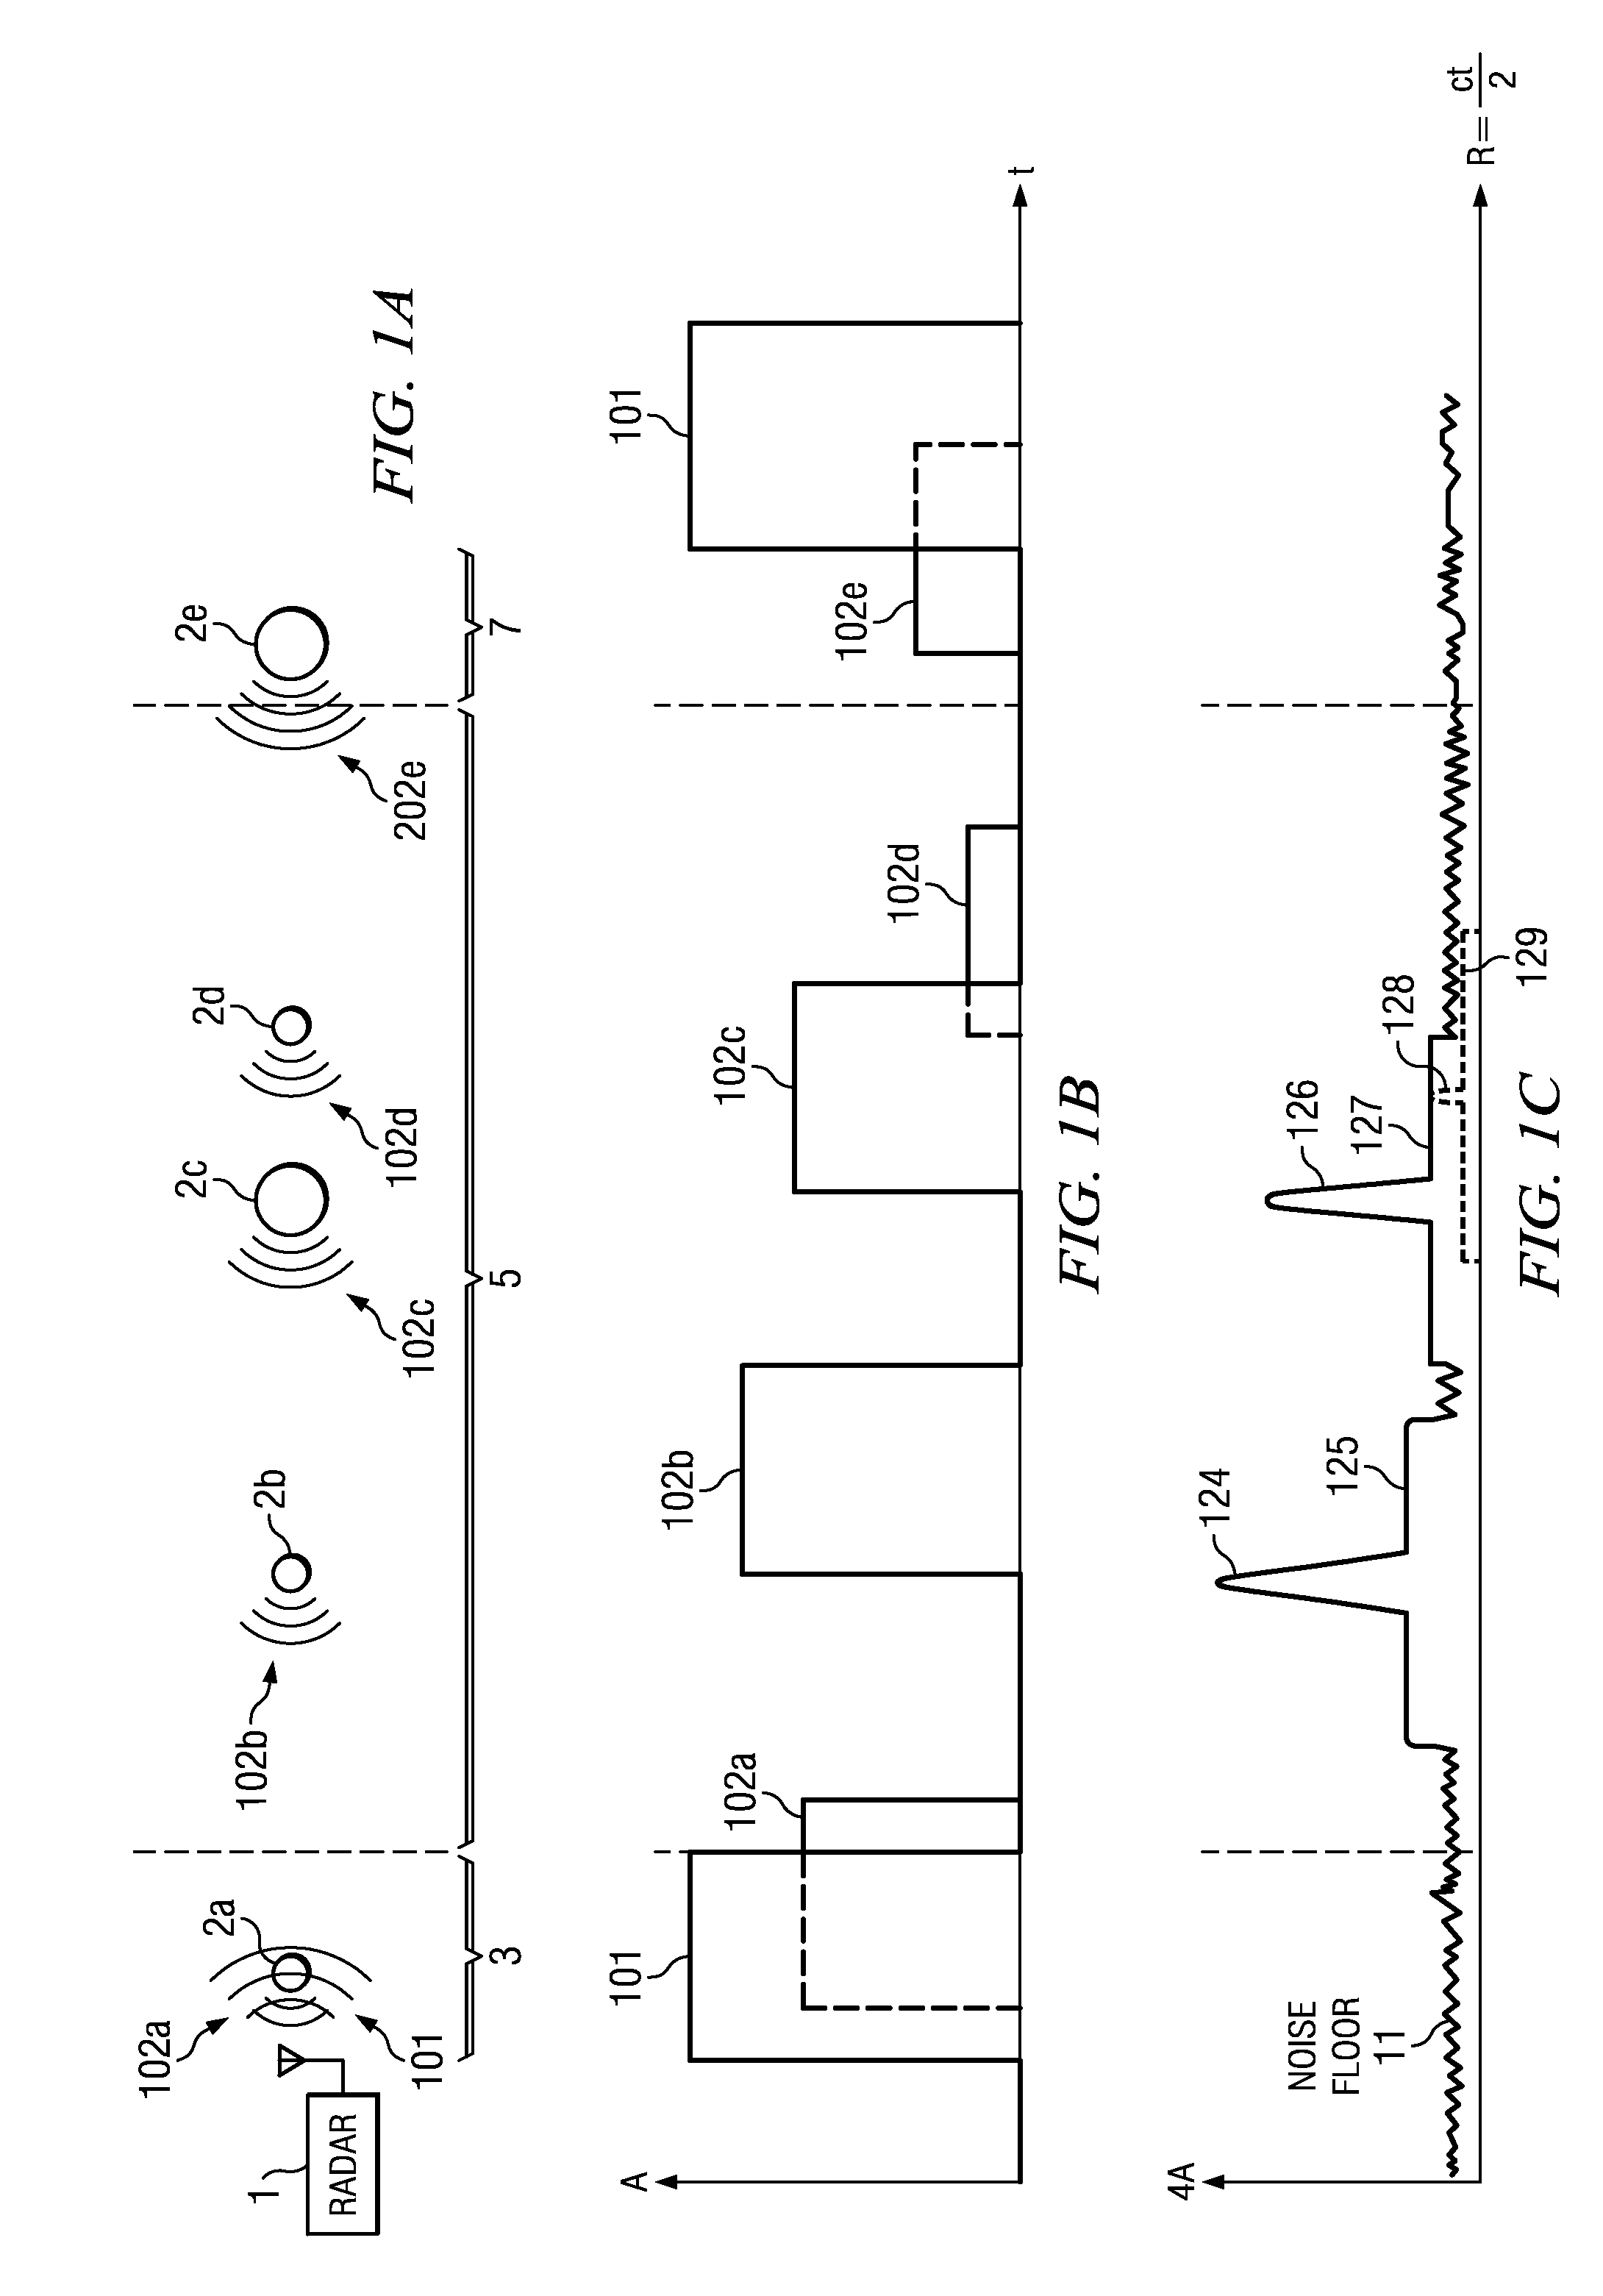 High Duty Cycle Radar with Near/Far Pulse Compression Interference Mitigation